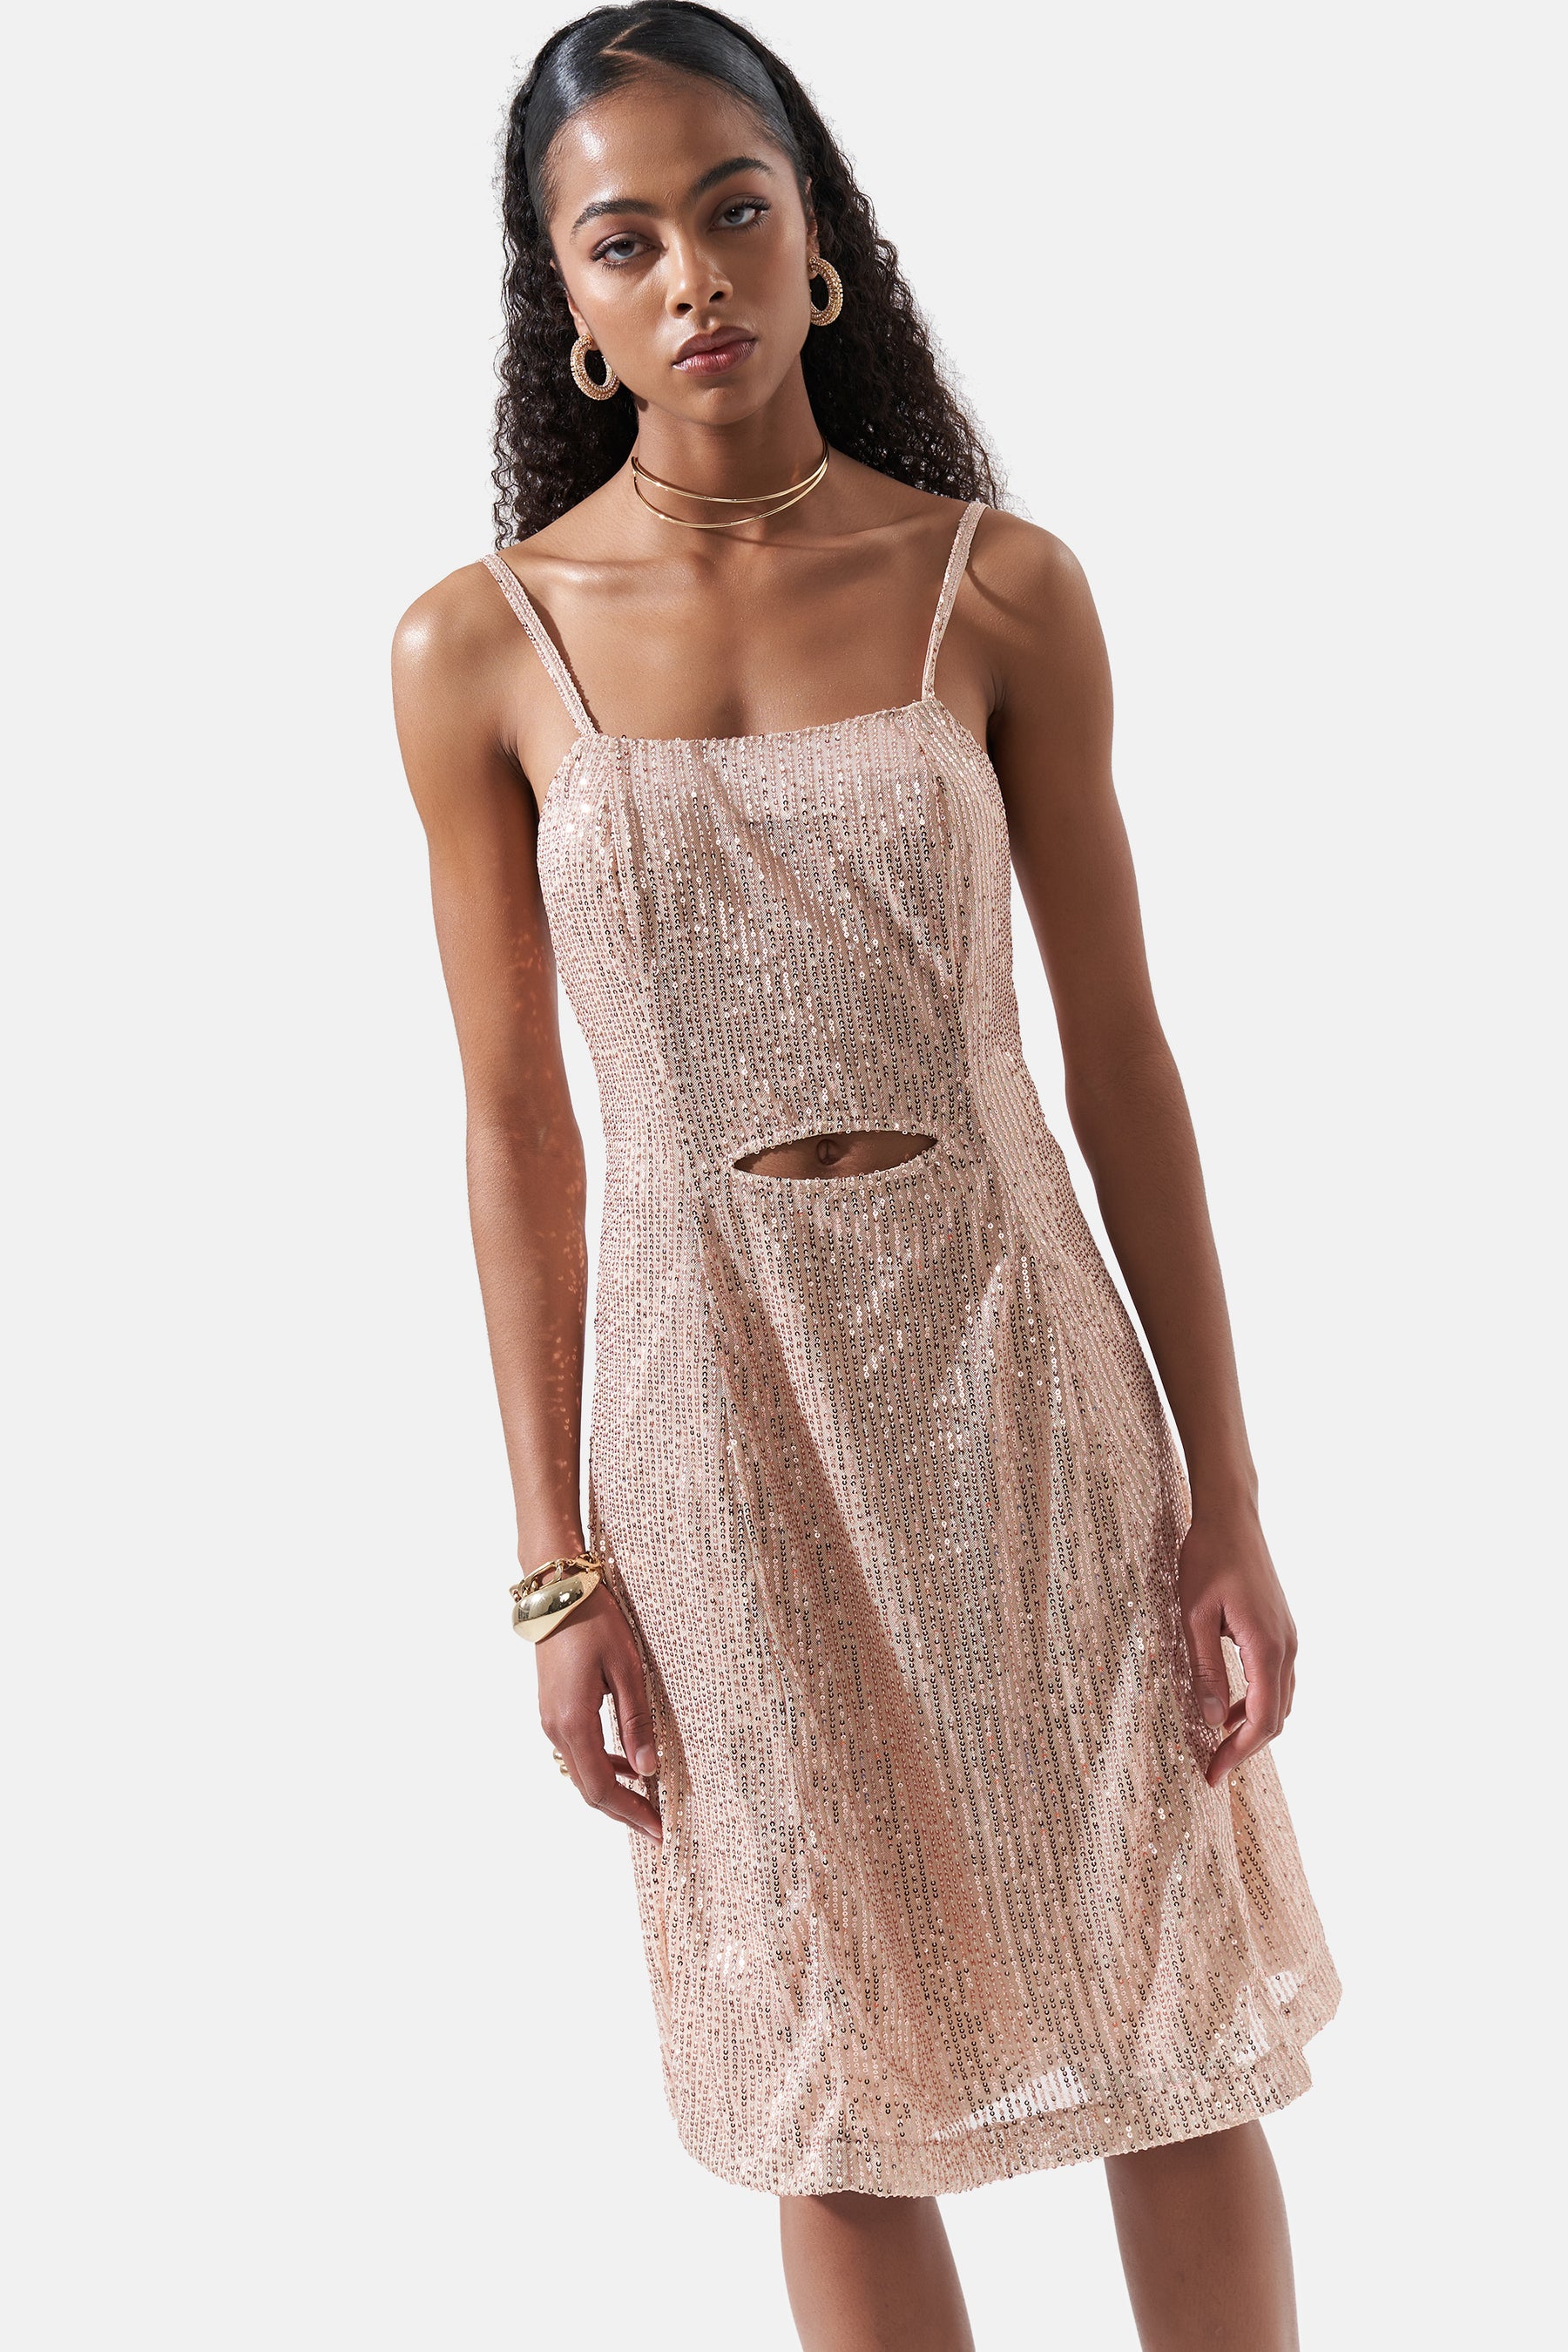 Joanna - Sequin Dress - Champagne Gold